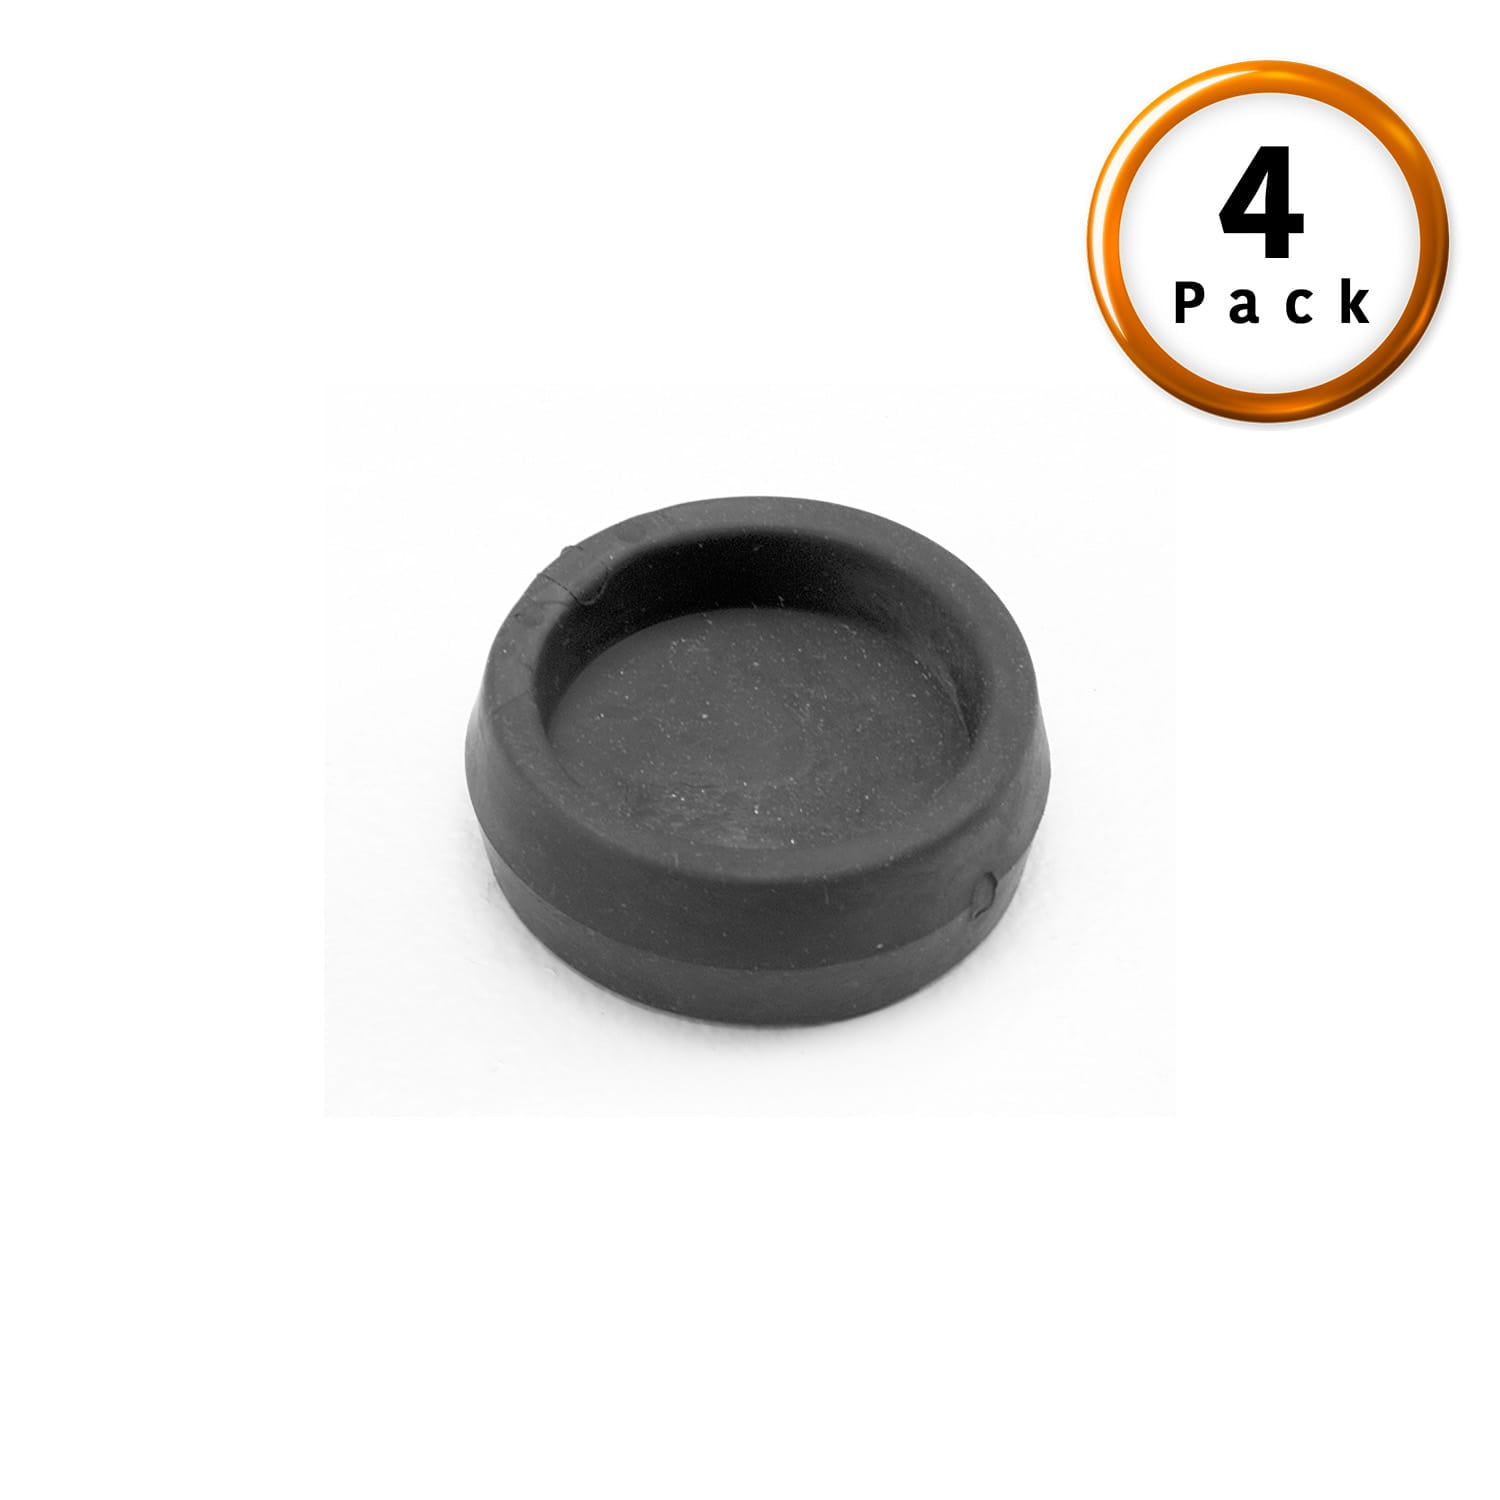 Rubber Caster Cups For Adjustable Bases, Rubber Casters For Bed Frame